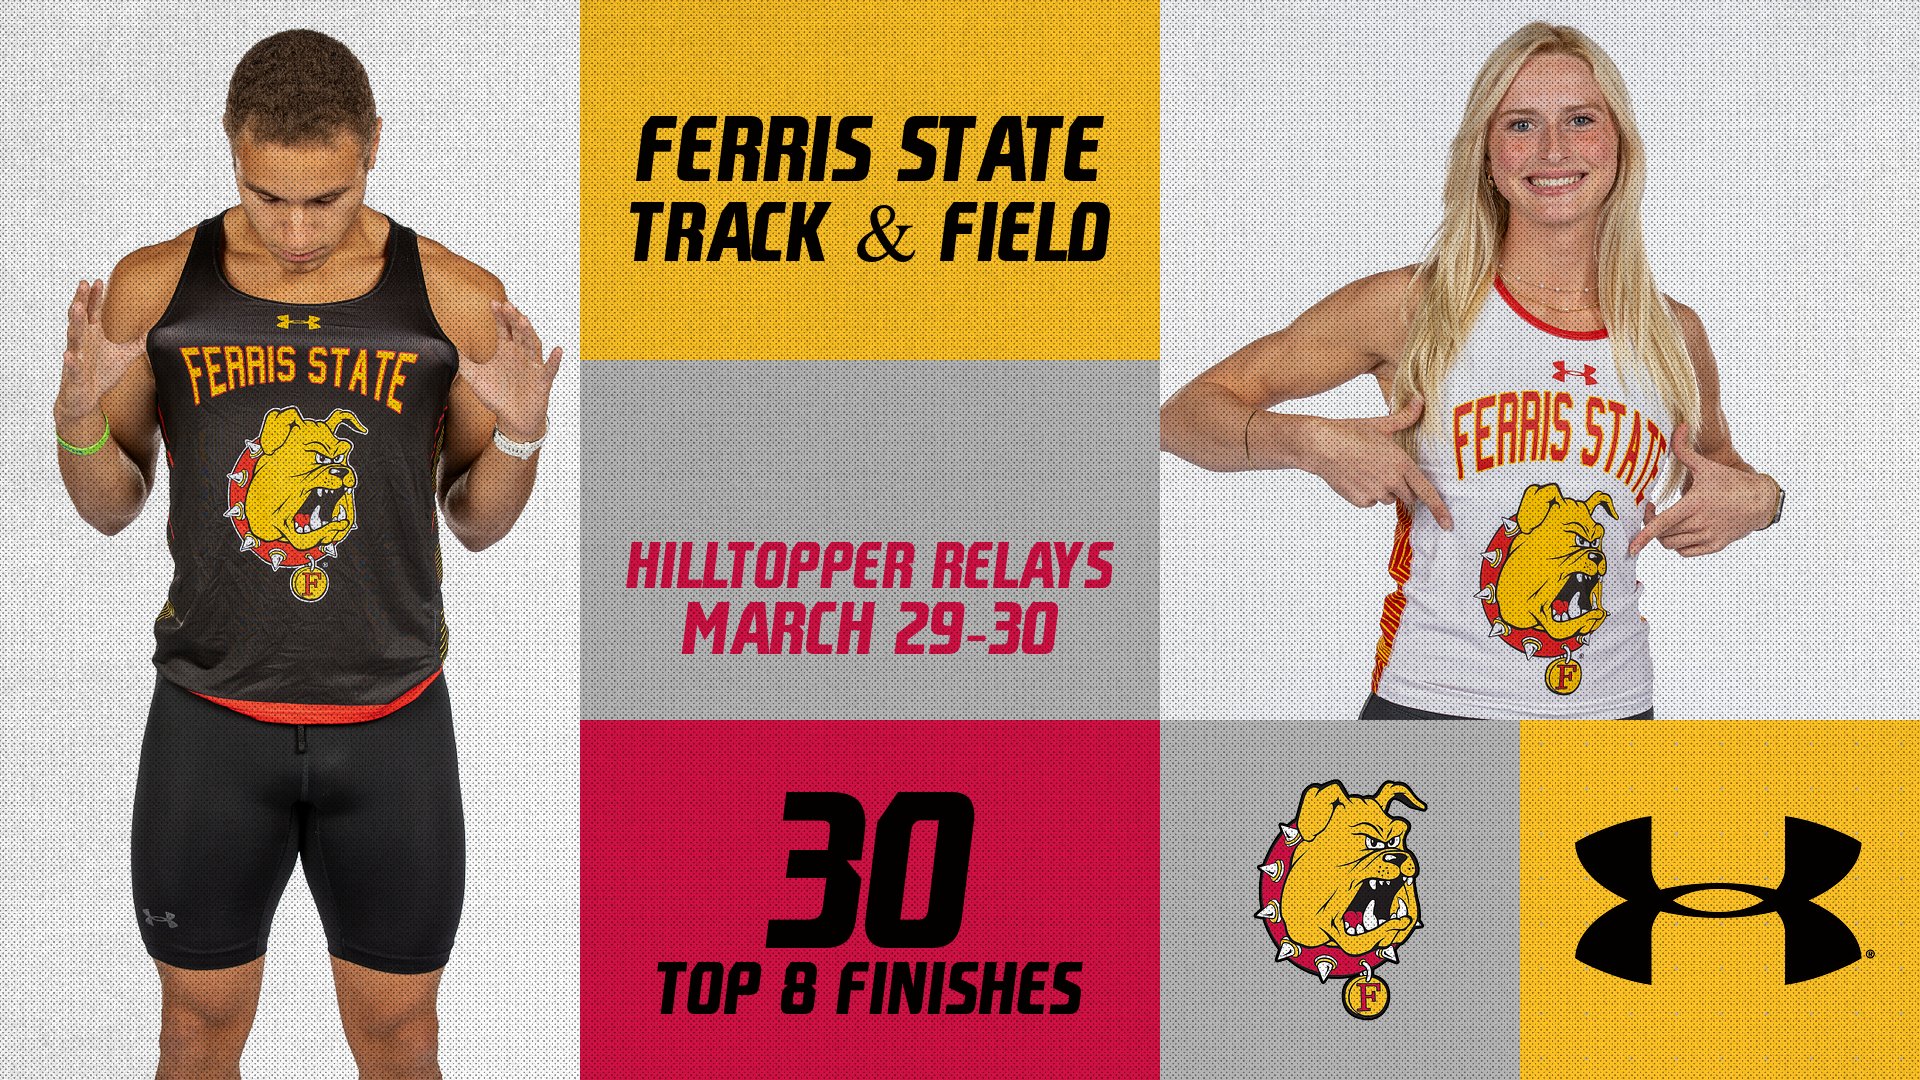 Bulldog Track Squads Combine For 30 Top-Eight Efforts At Hilltopper Relays